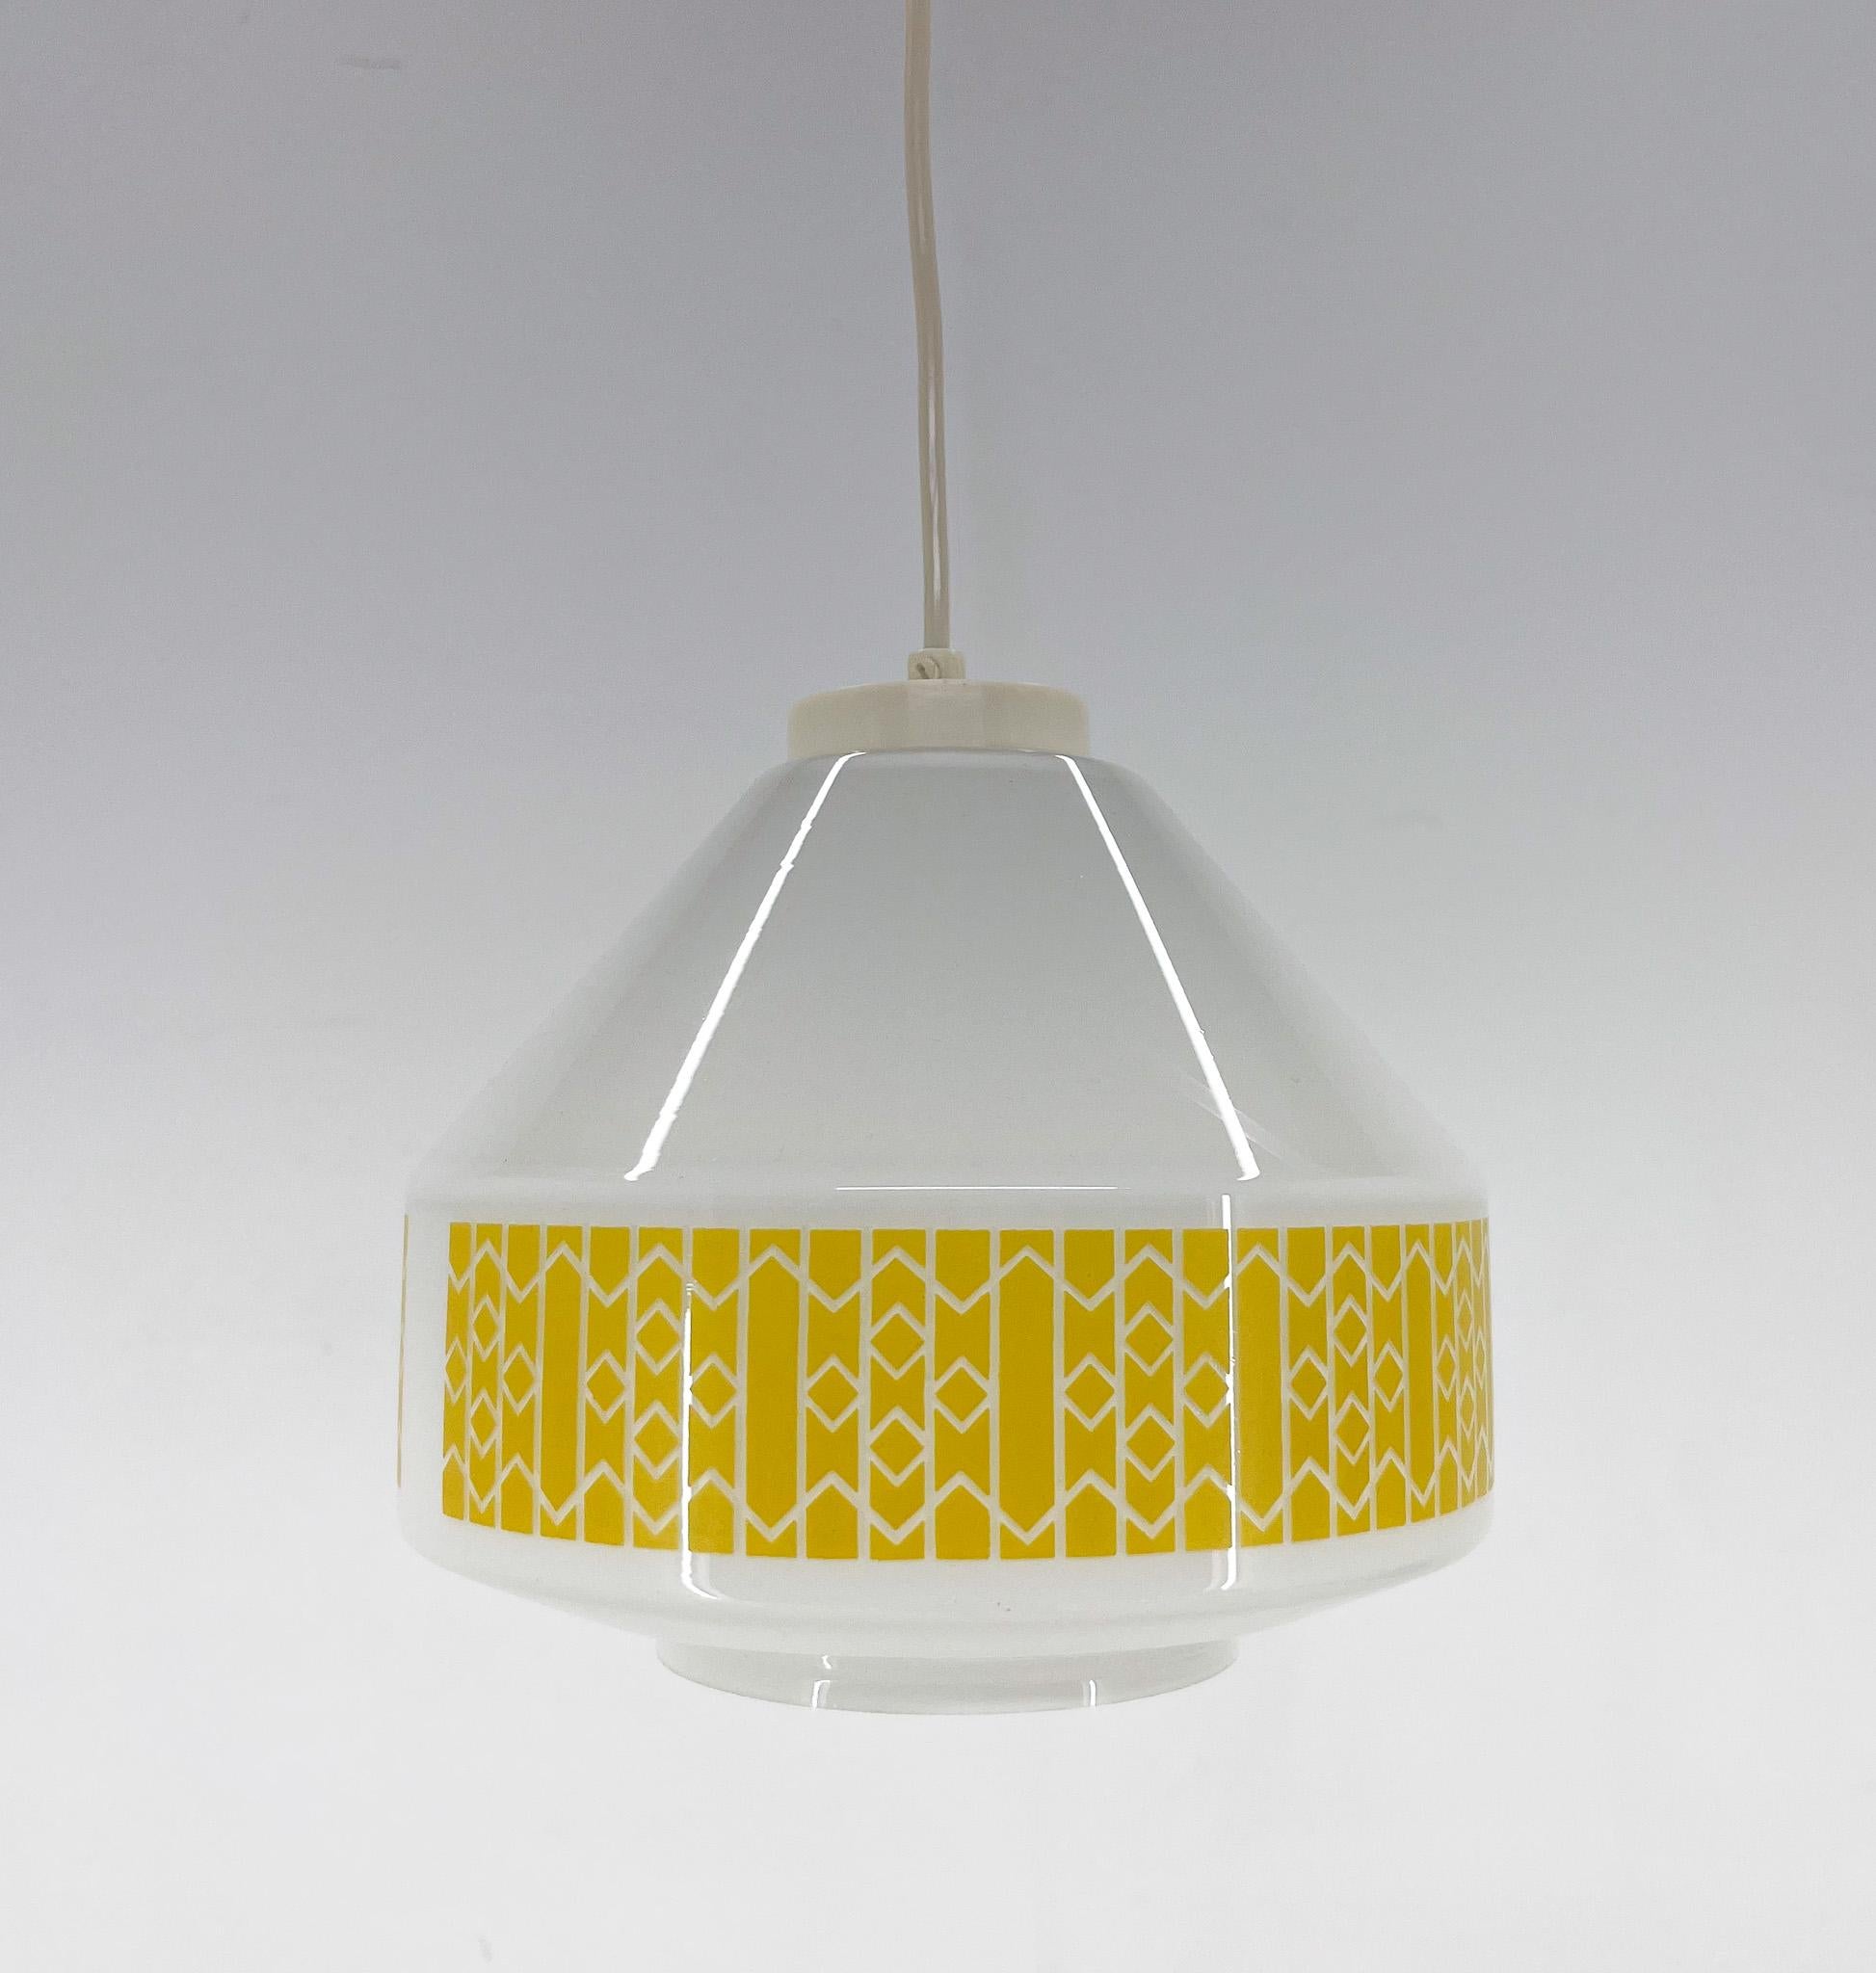 Vintage glass pendant light made of milk glass with yellow printed decoration. Bulb: 1x E26-27. US wiring compatible.